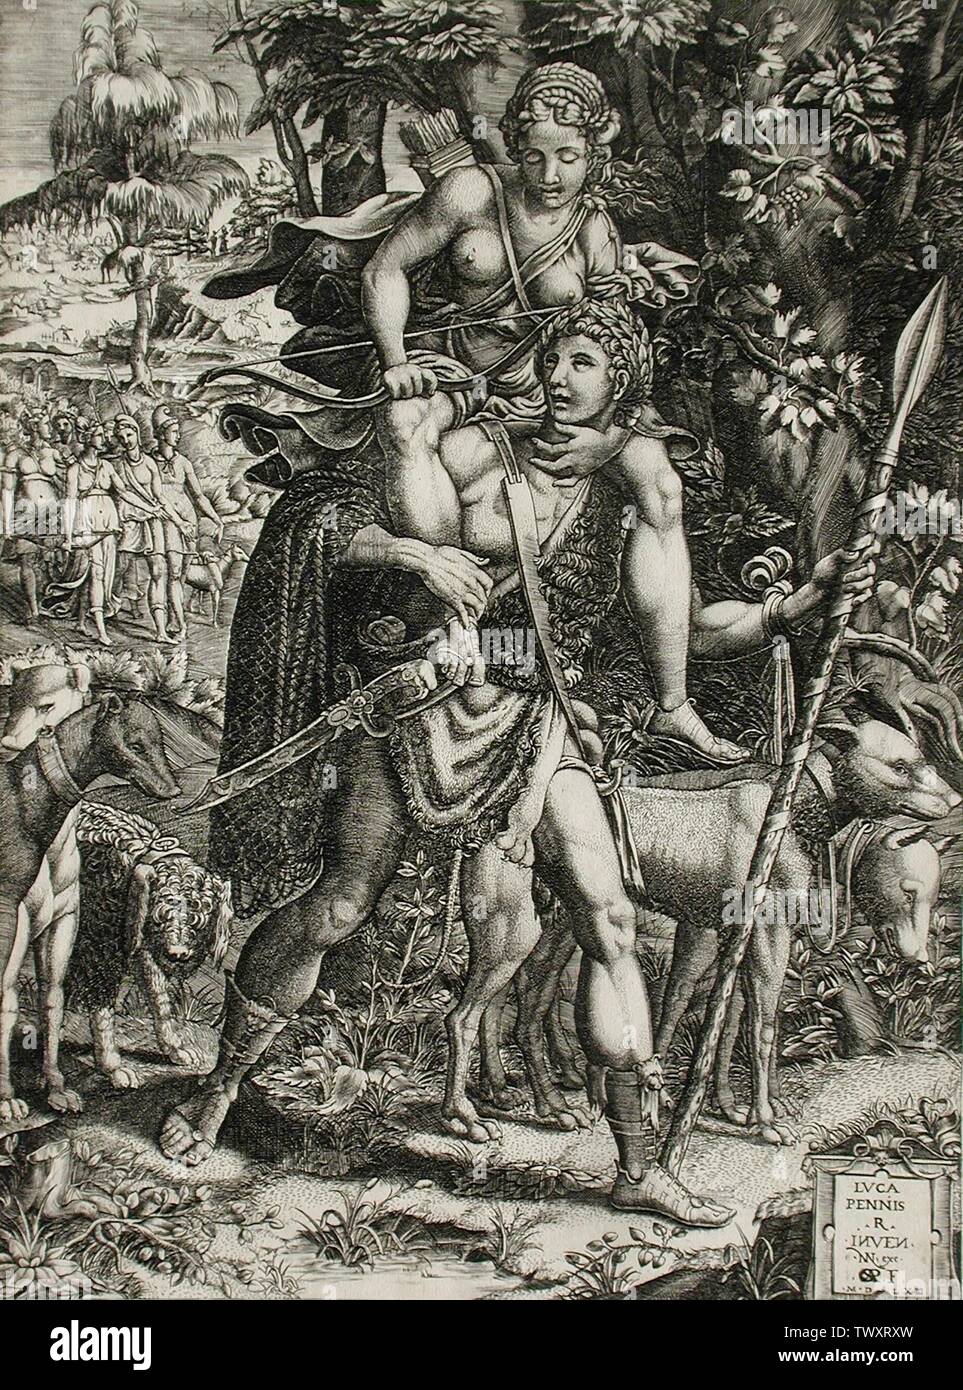 Allegory of the Hunt;  Italy, 1563 Prints; engravings Engraving Sheet: 13 5/16 x 9 7/8 in. (33.81 x 25.08 cm) Mary Stansbury Ruiz Bequest (M.88.91.190) Prints and Drawings; 1563date QS:P571,+1563-00-00T00:00:00Z/9; Stock Photo